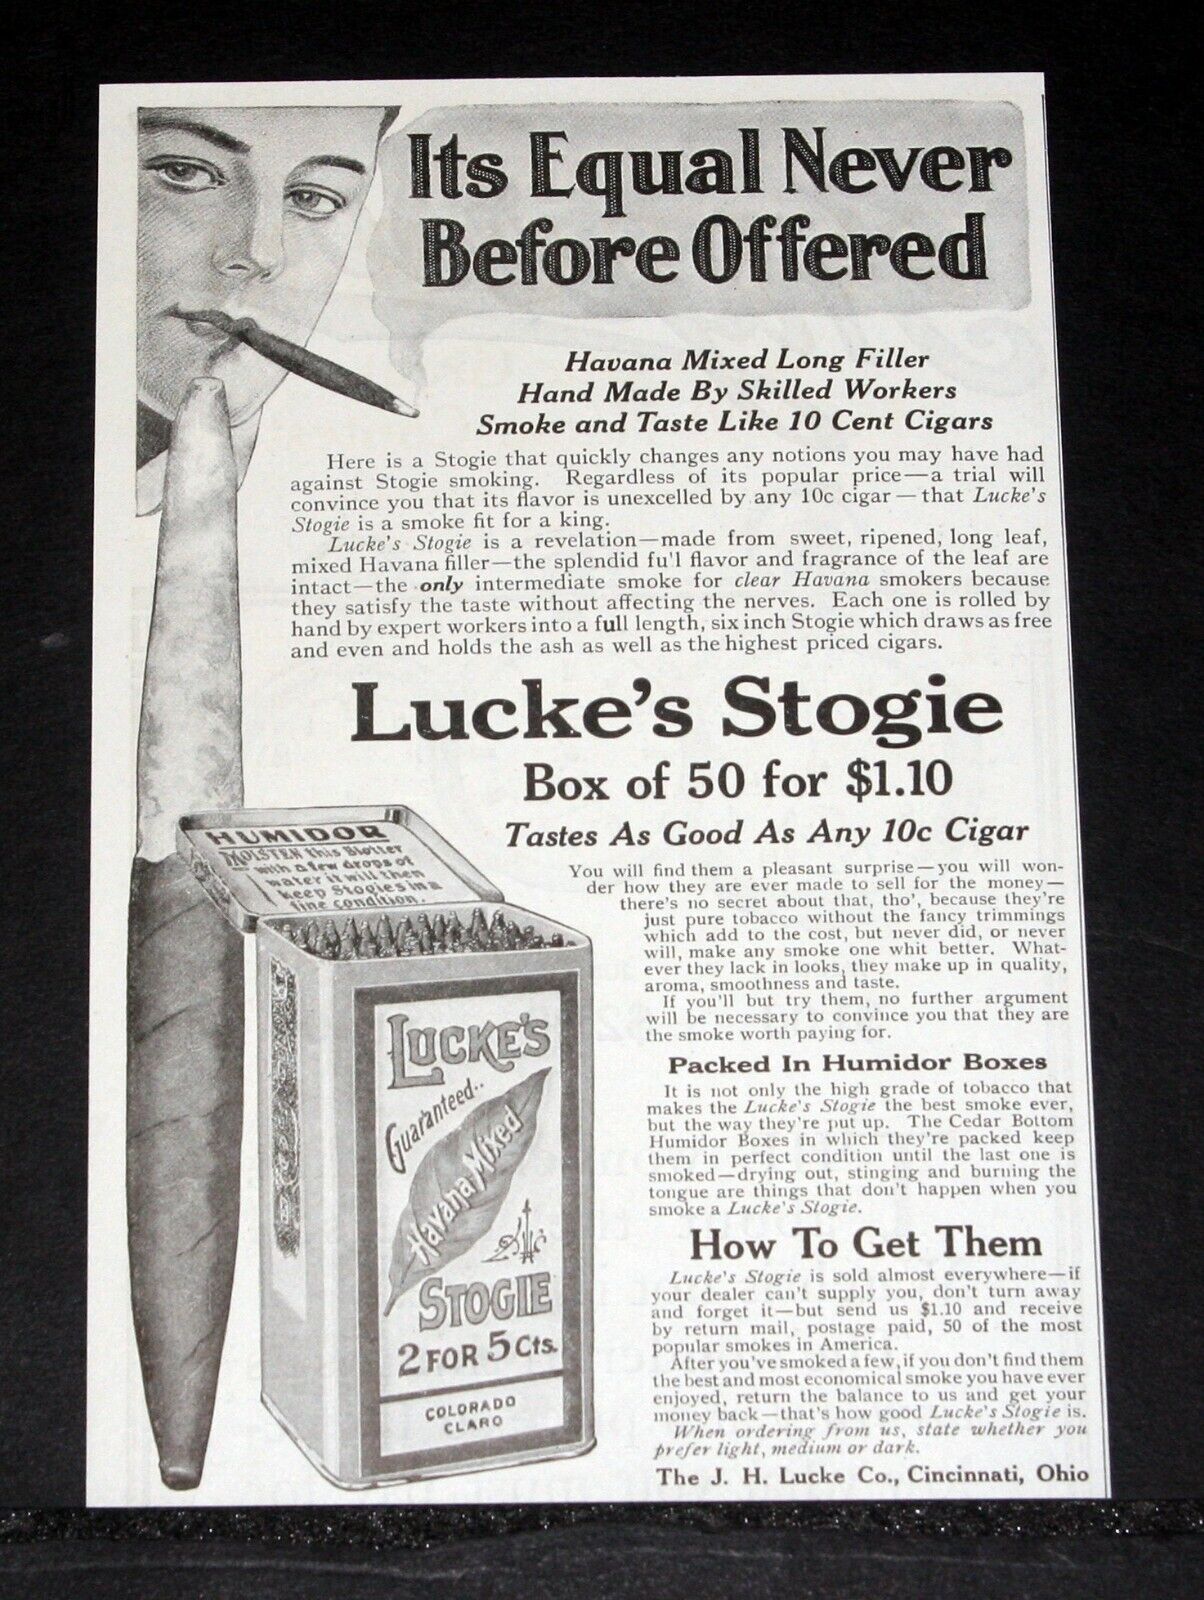 1911 OLD MAGAZINE PRINT AD, LUCKES STOGIE CIGAR, ITS EQUAL NEVER BEFORE OFFERED